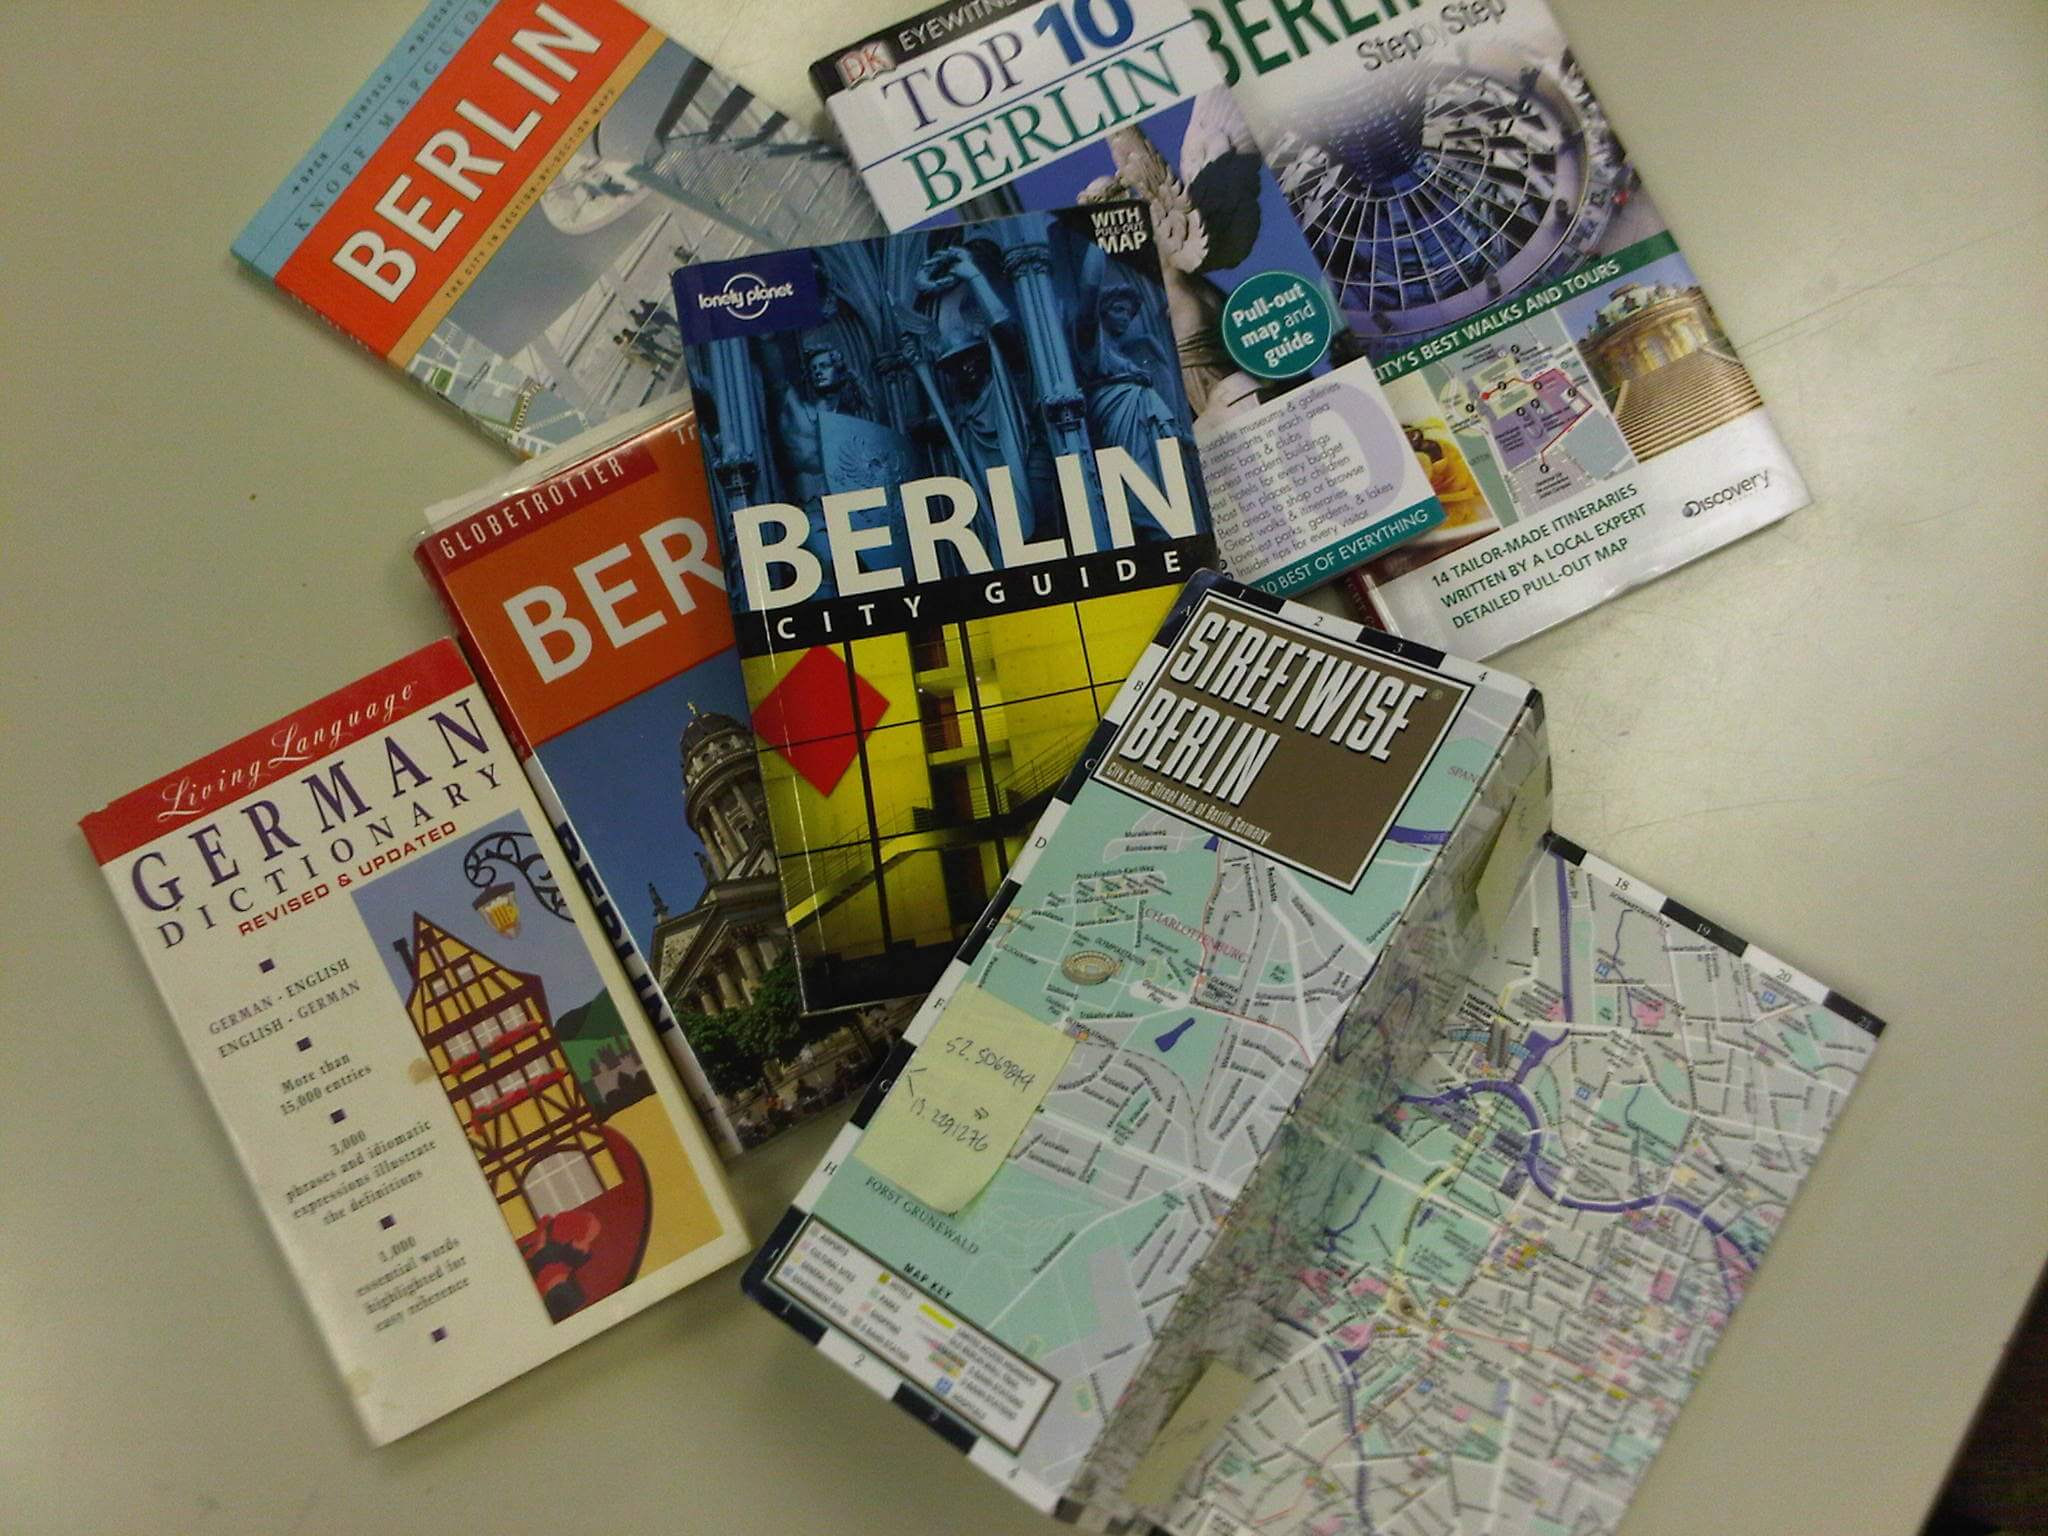 Berlin guide books and maps